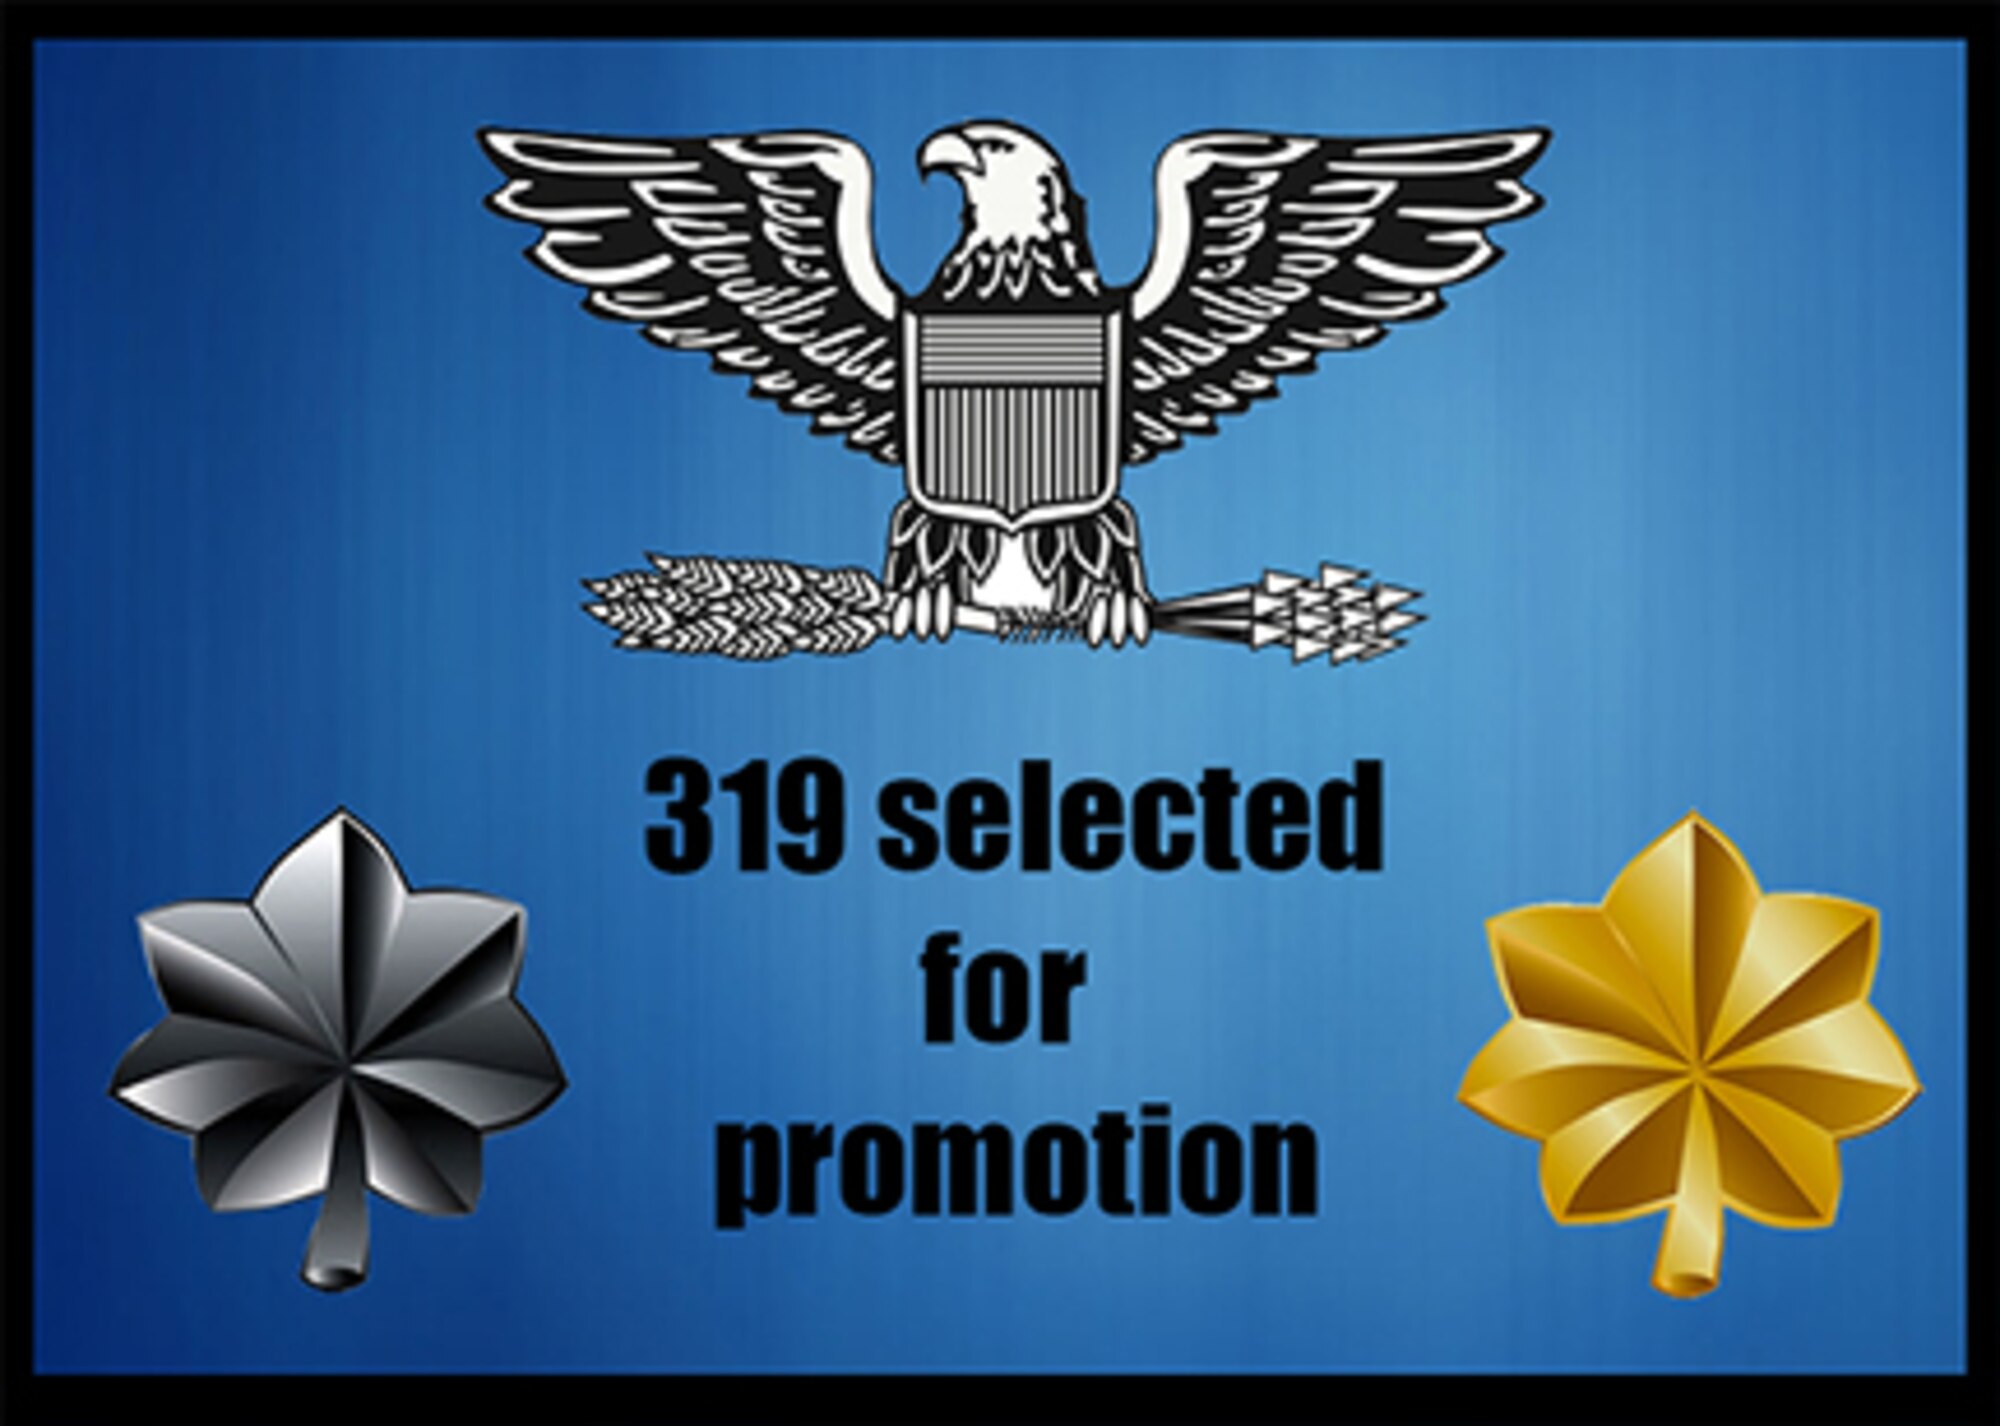 The Air Force selected 319 for promotion to colonel, lieutenant colonel and major during the 2016A Colonel Chaplain and Medical Service Corps; Lieutenant Colonel Line of the Air Force, LAF-J and Nurse Corps; and Major LAF-J, Medical Service Corps and Nurse Corps central selection boards. (AFPC courtesy graphic)